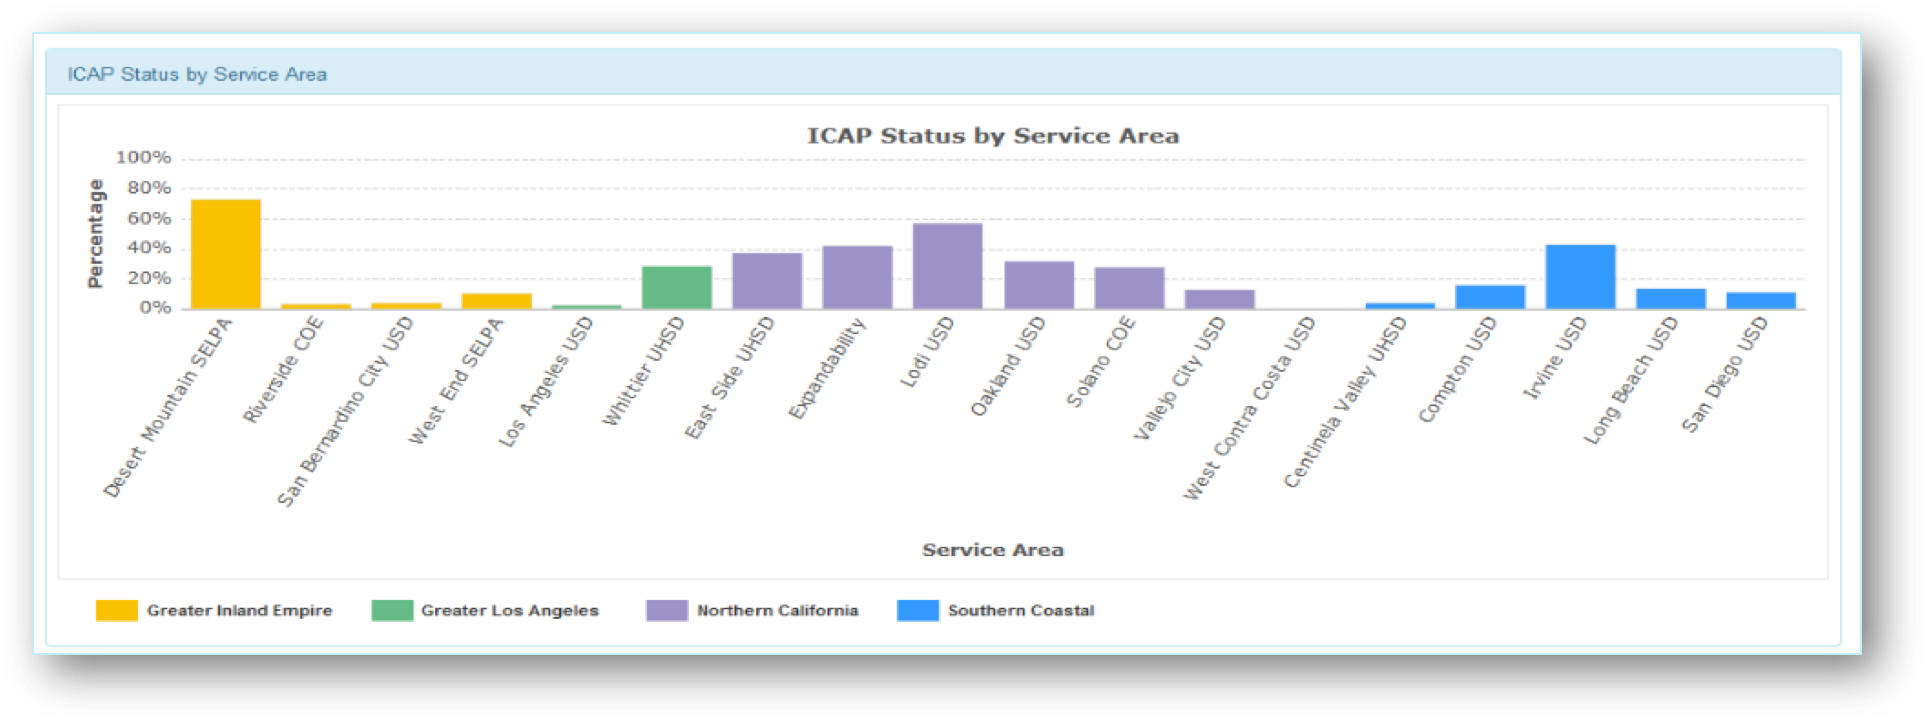 Screenshot image of the ICAP Status by Service Area chart.